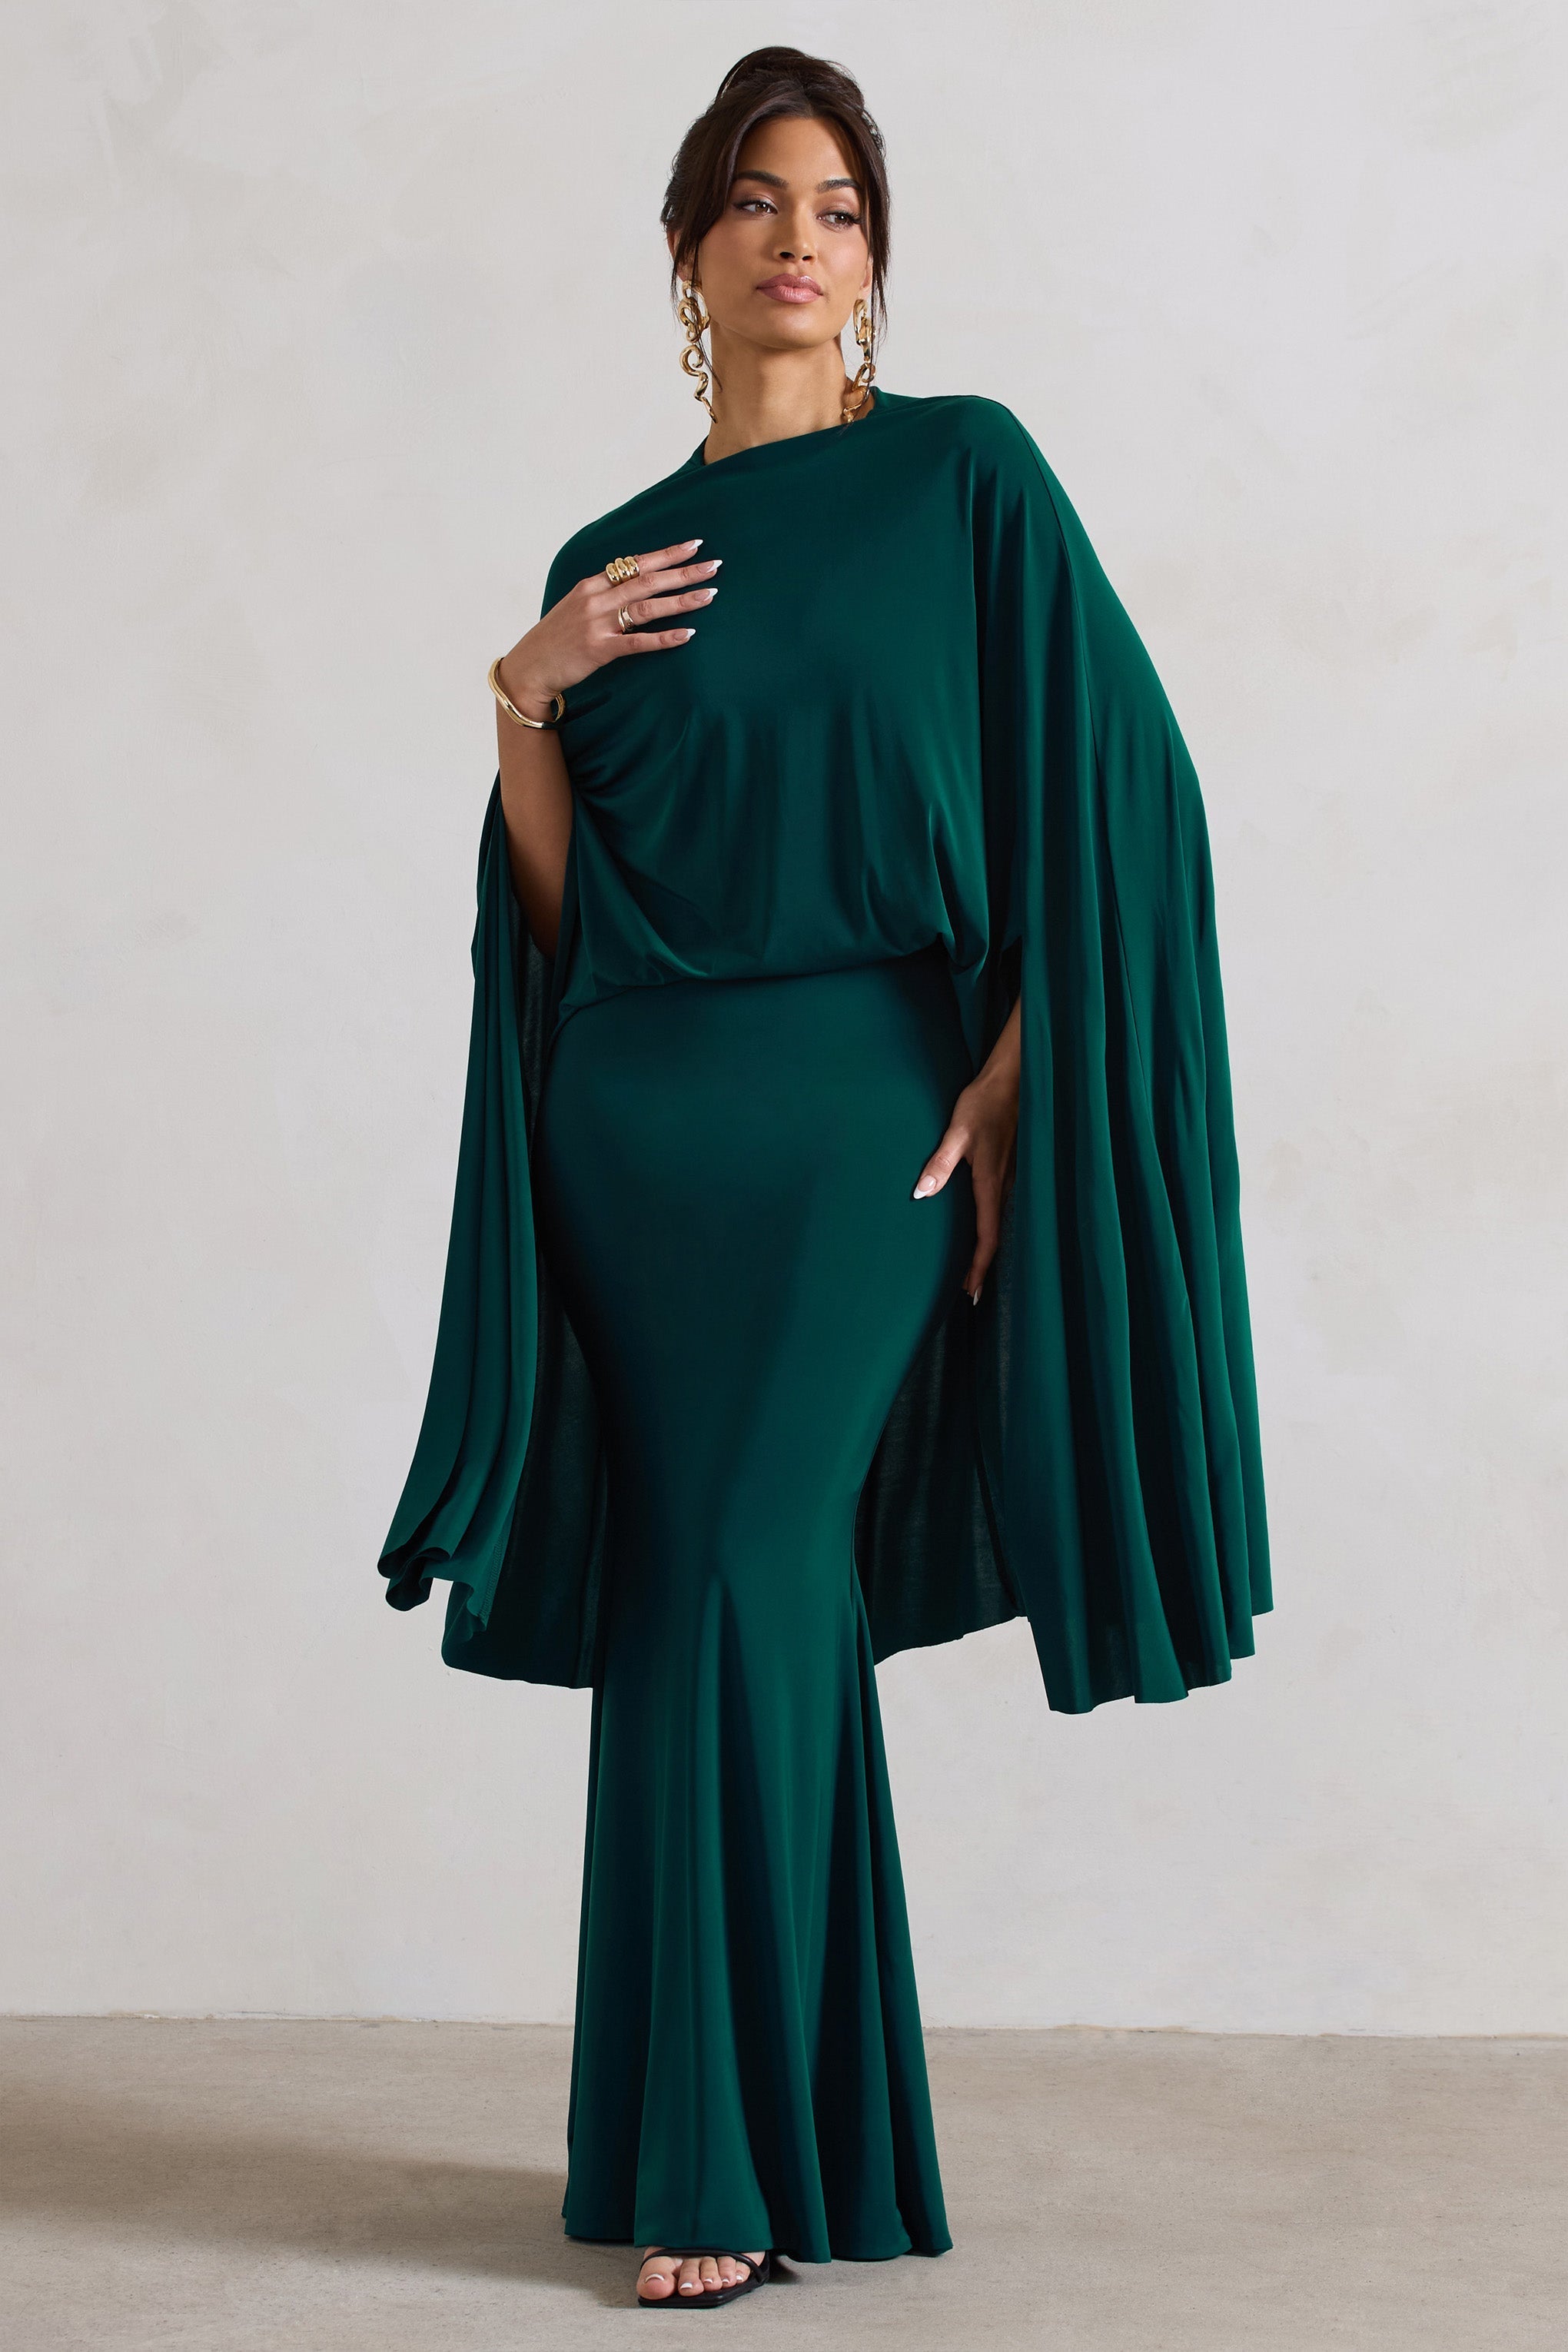 Charmaine Bottle Green High-Neck Maxi Dress With Cape